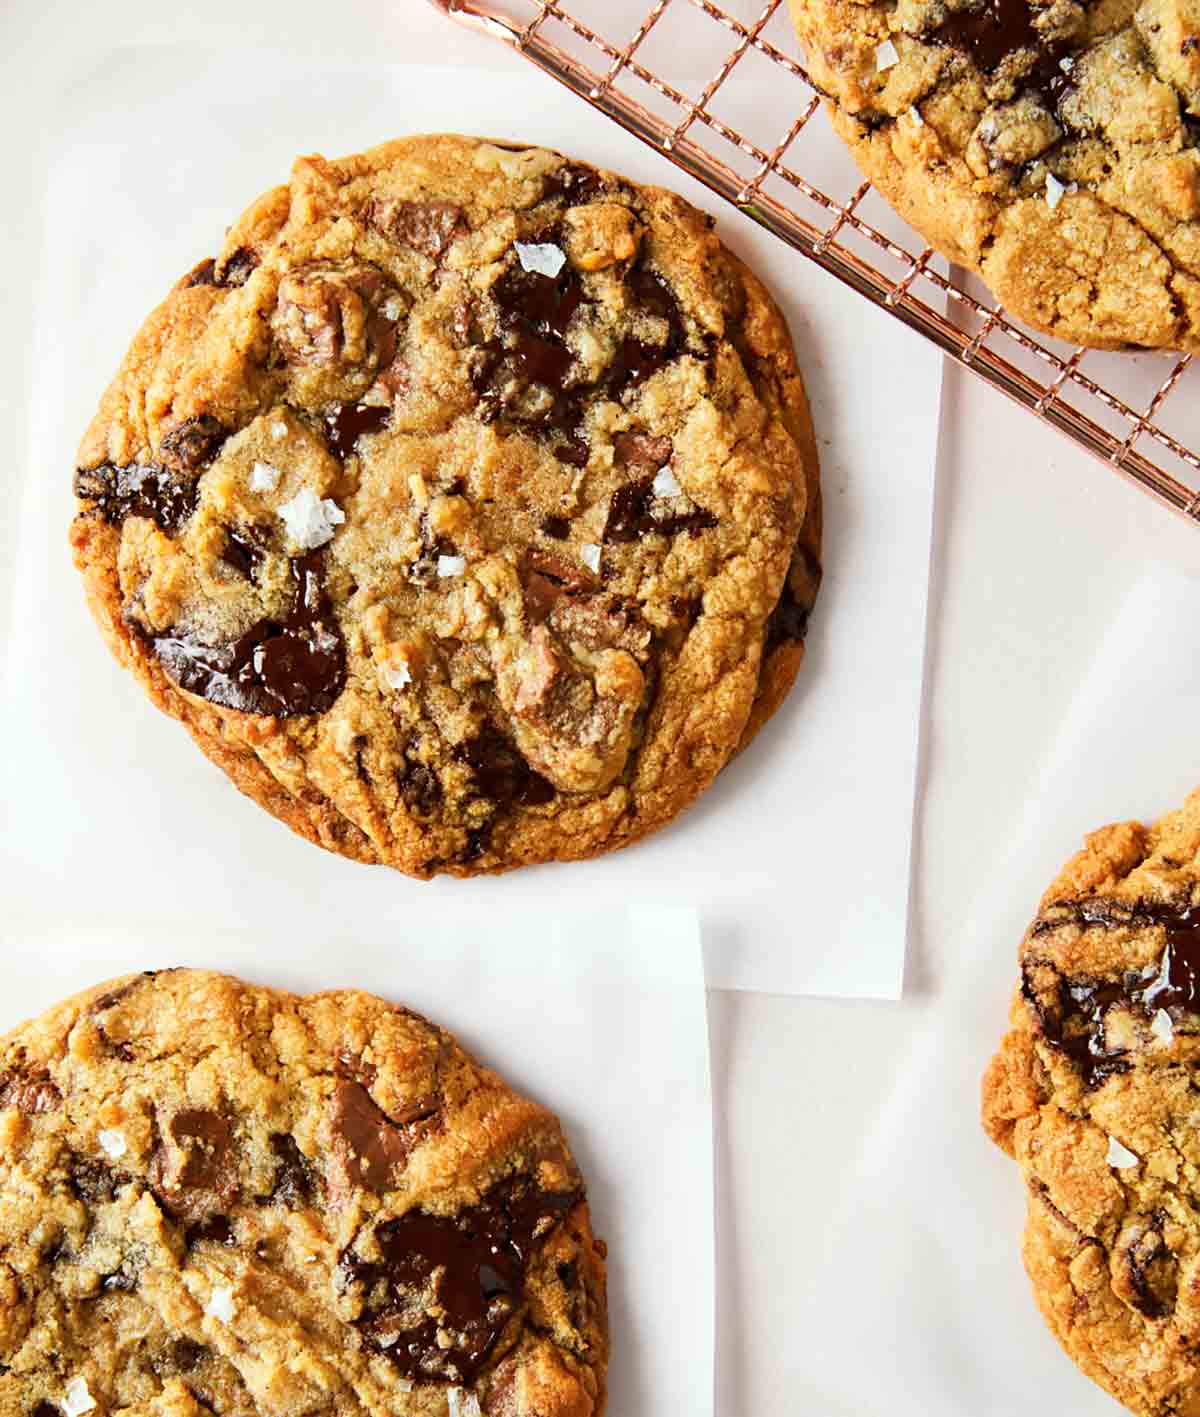 Several bakery style chocolate chip cookies cooling on a rack.